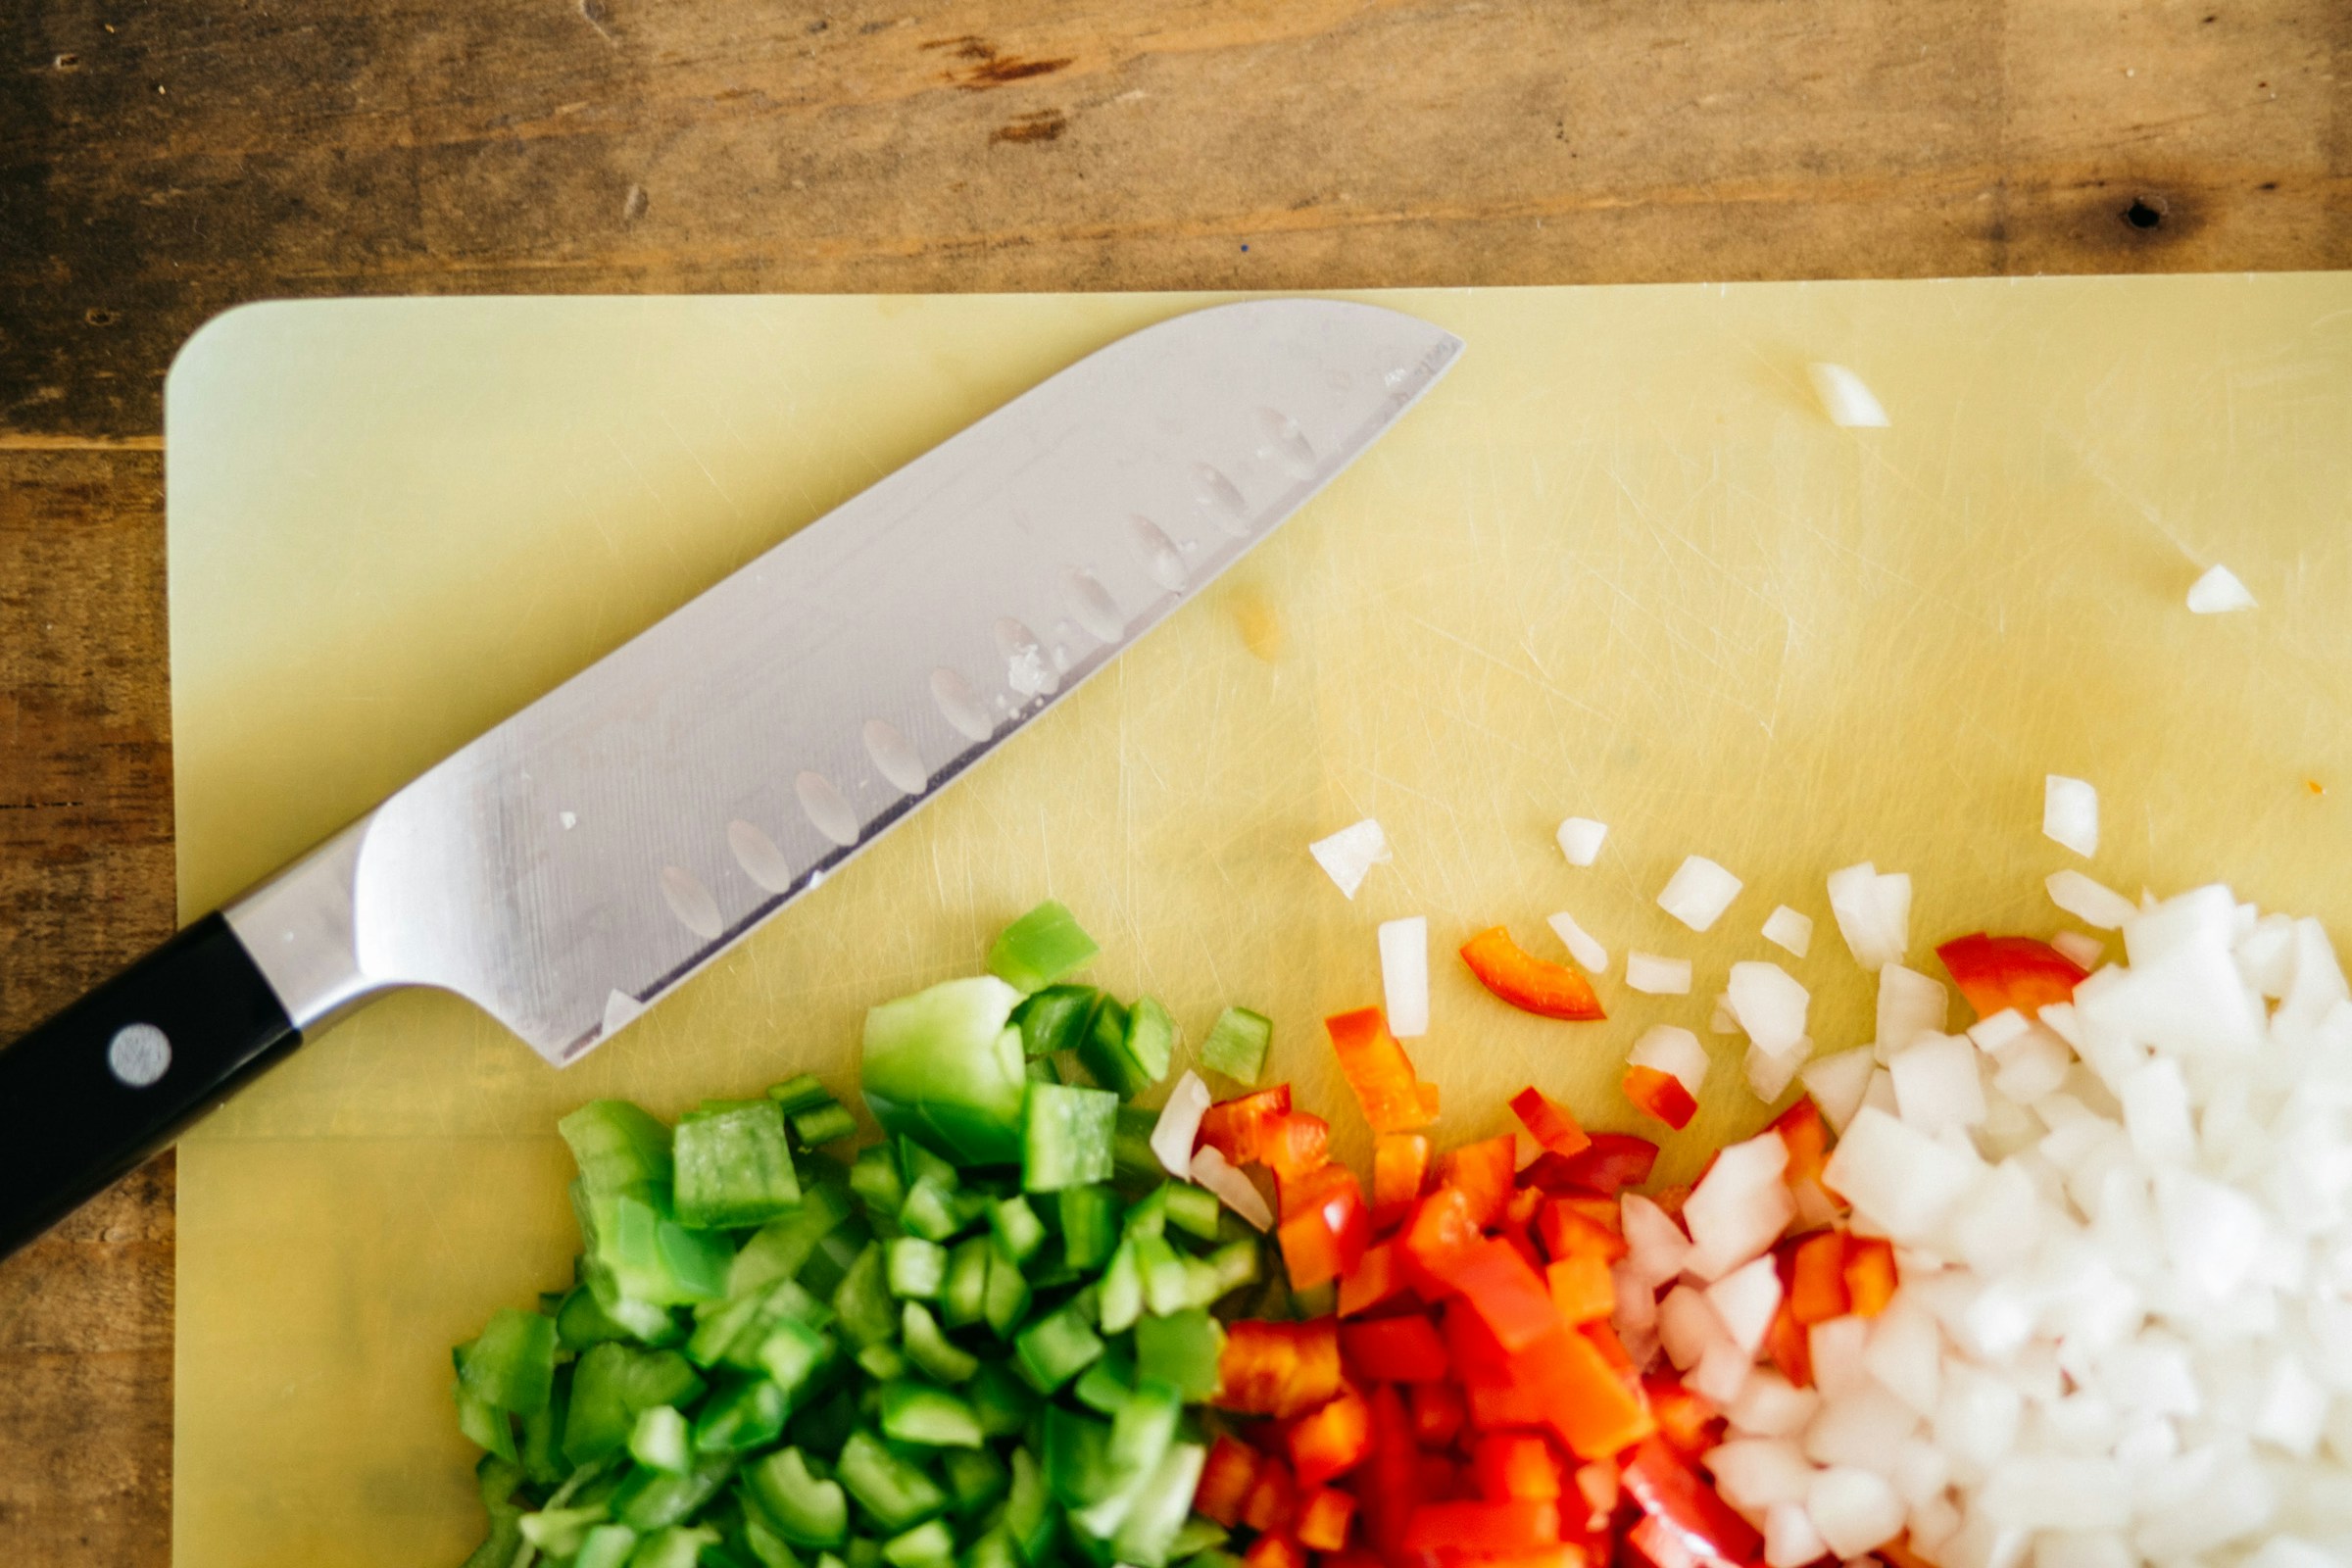 Chopped vegetables on a board | Source: Unsplash